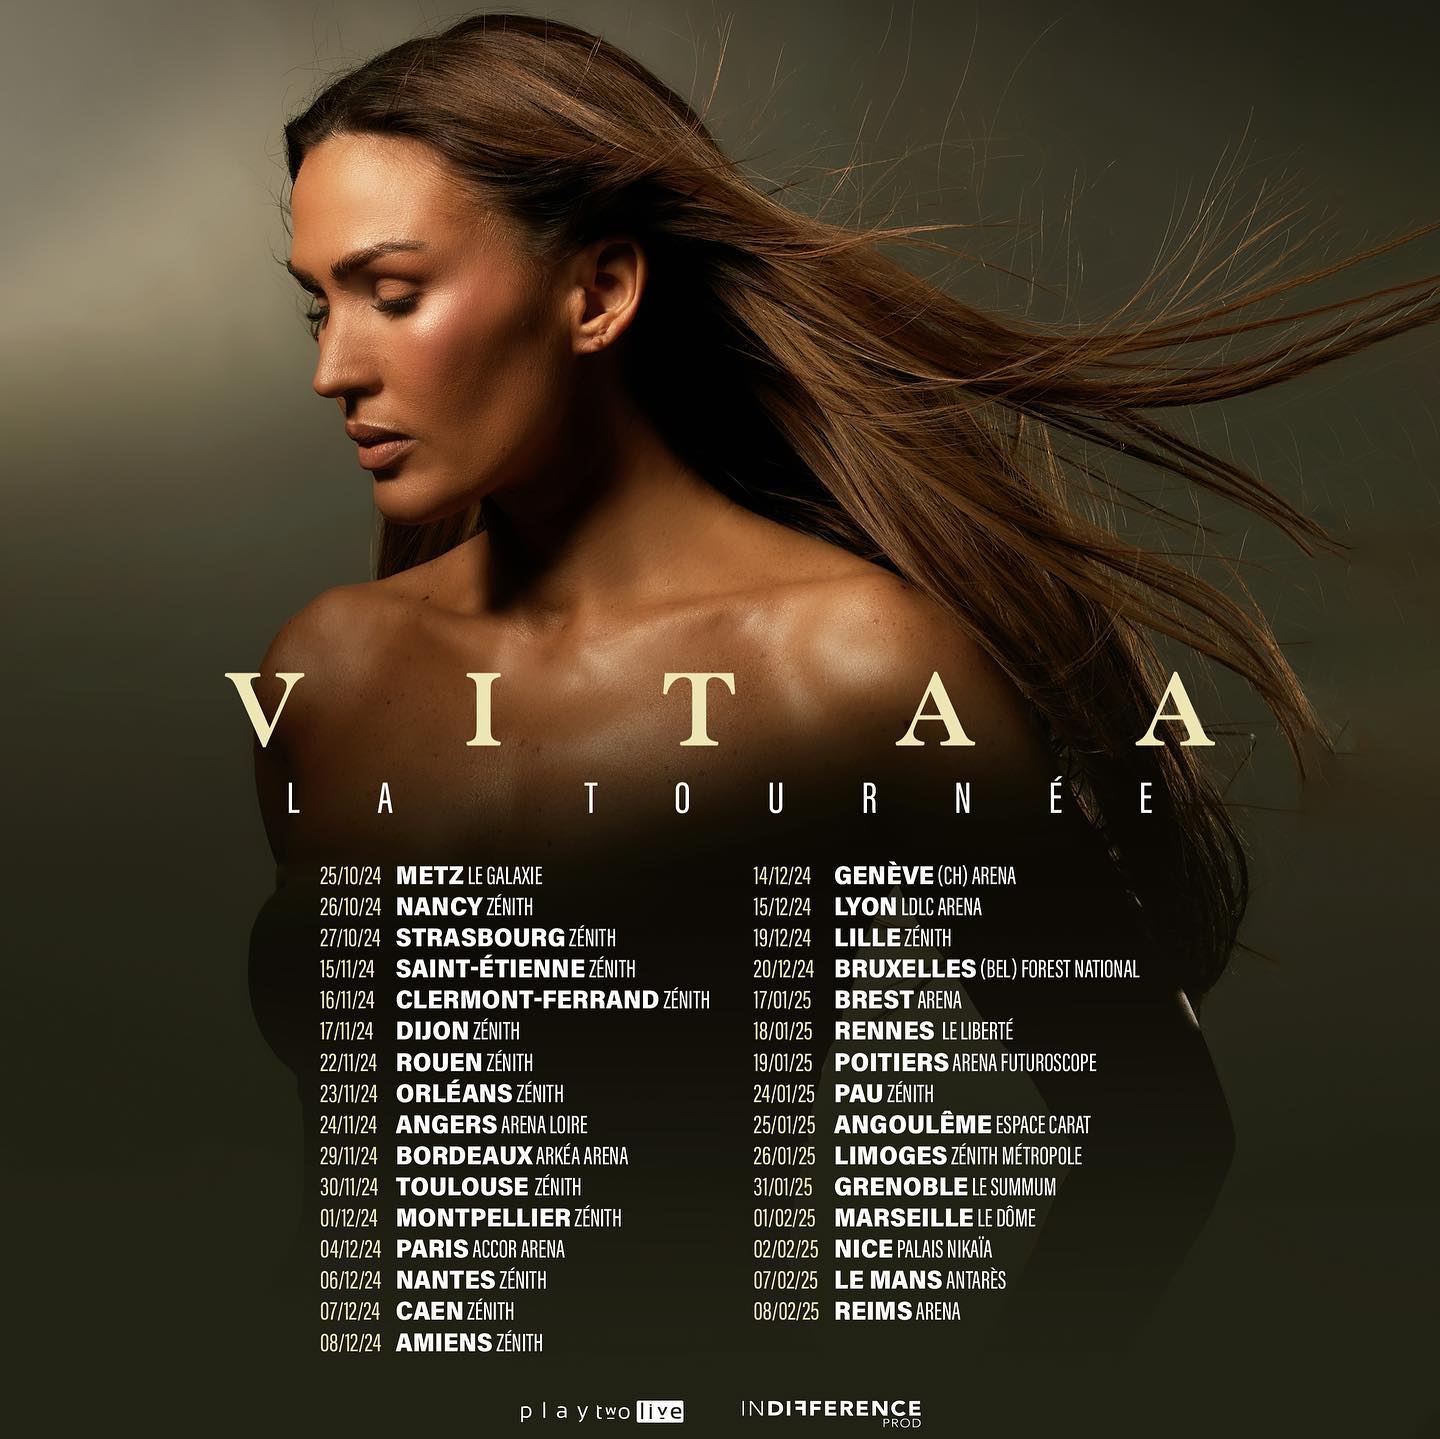 Vitaa at Espace Carat Angouleme Tickets